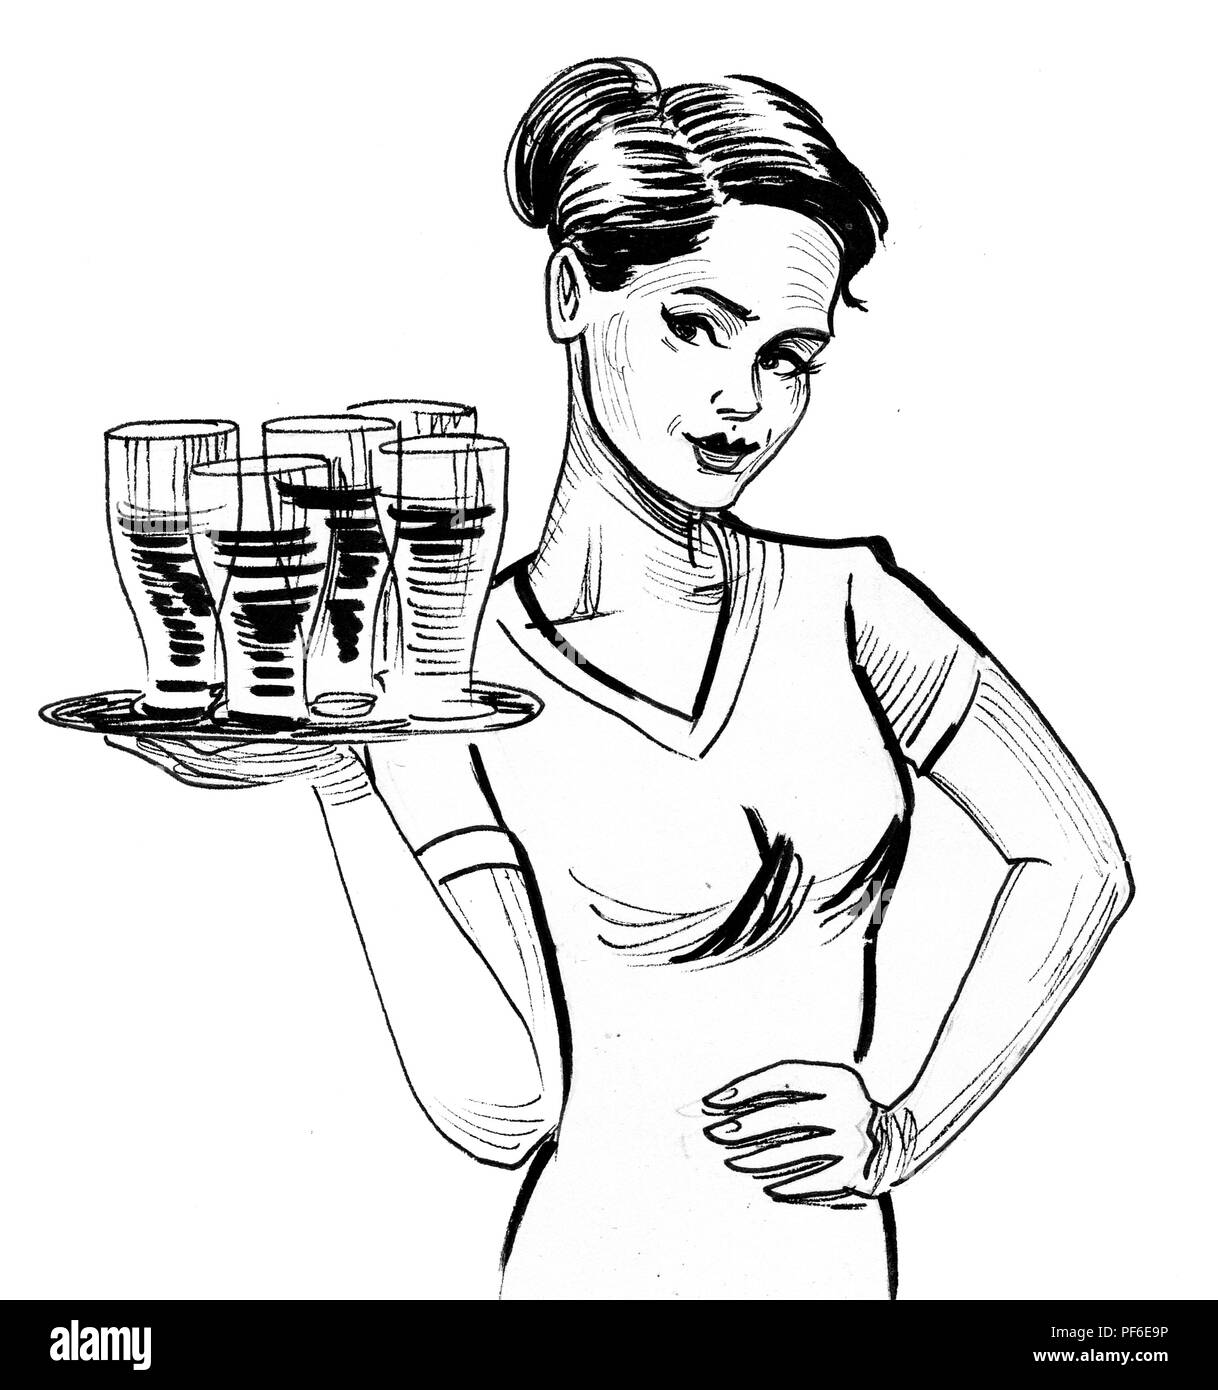 Pretty waitress carrying a beer glasses Stock Photo